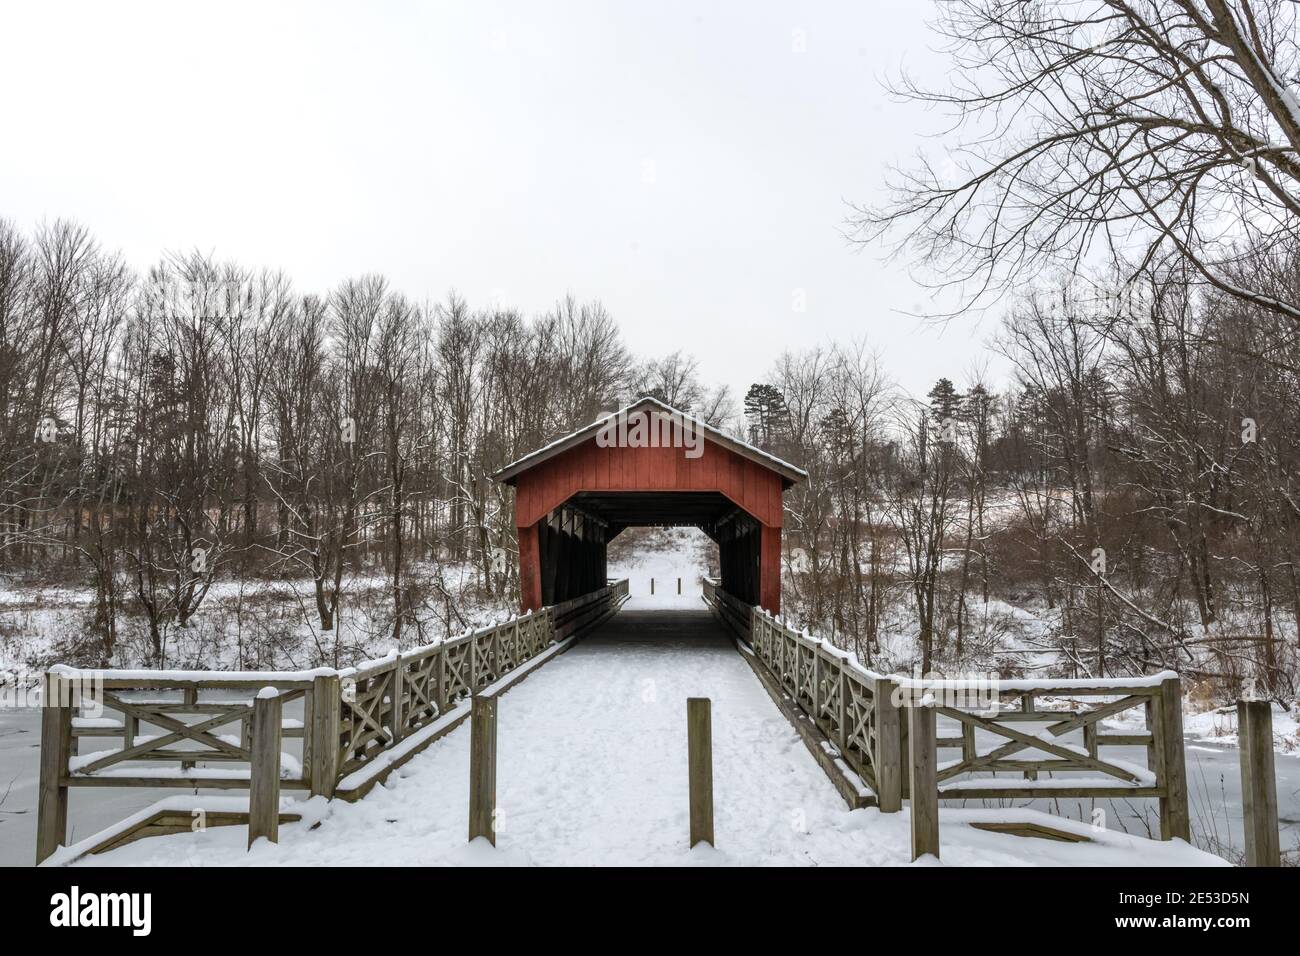 St. Clairsville, Ohio/USA- January 15, 2019: Snow-covered, historic Shaeffer Campbell Covered Bridge and the frozen College Pond with surrounding fore Stock Photo